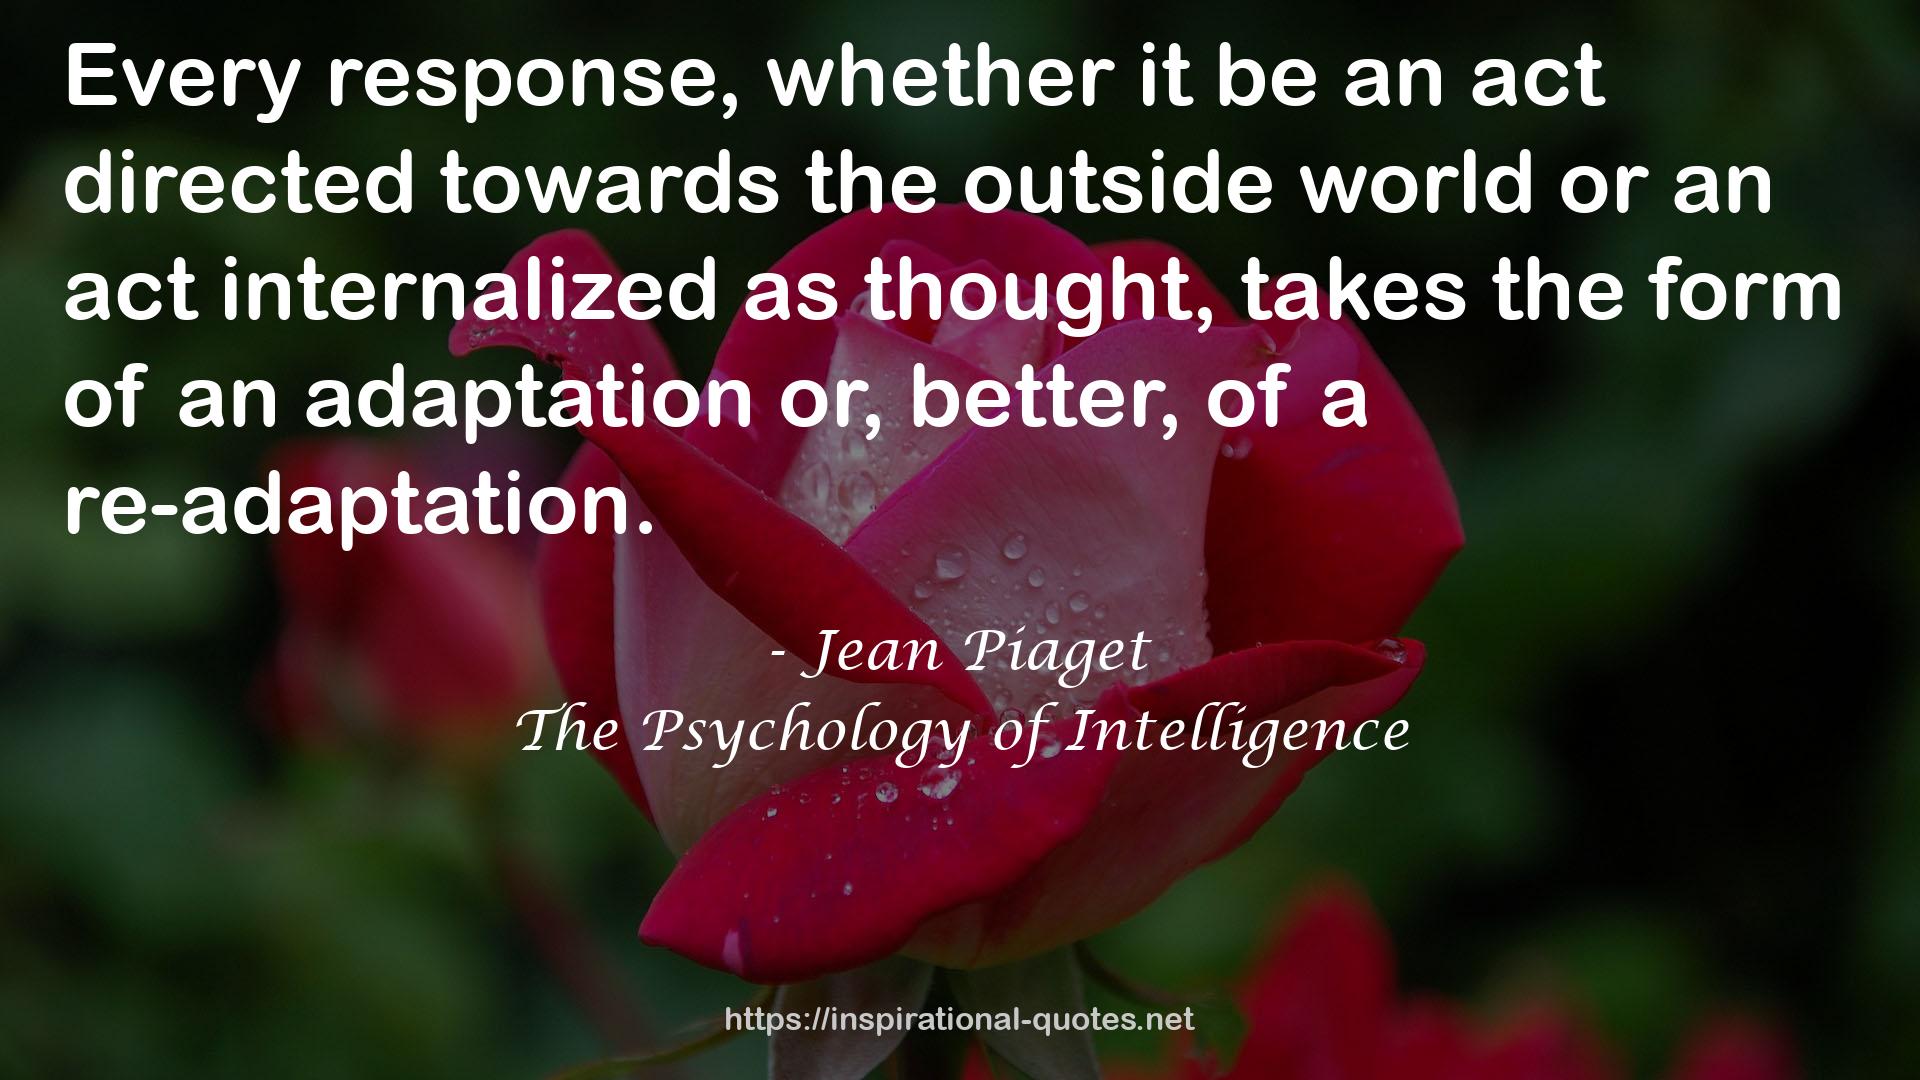 The Psychology of Intelligence QUOTES